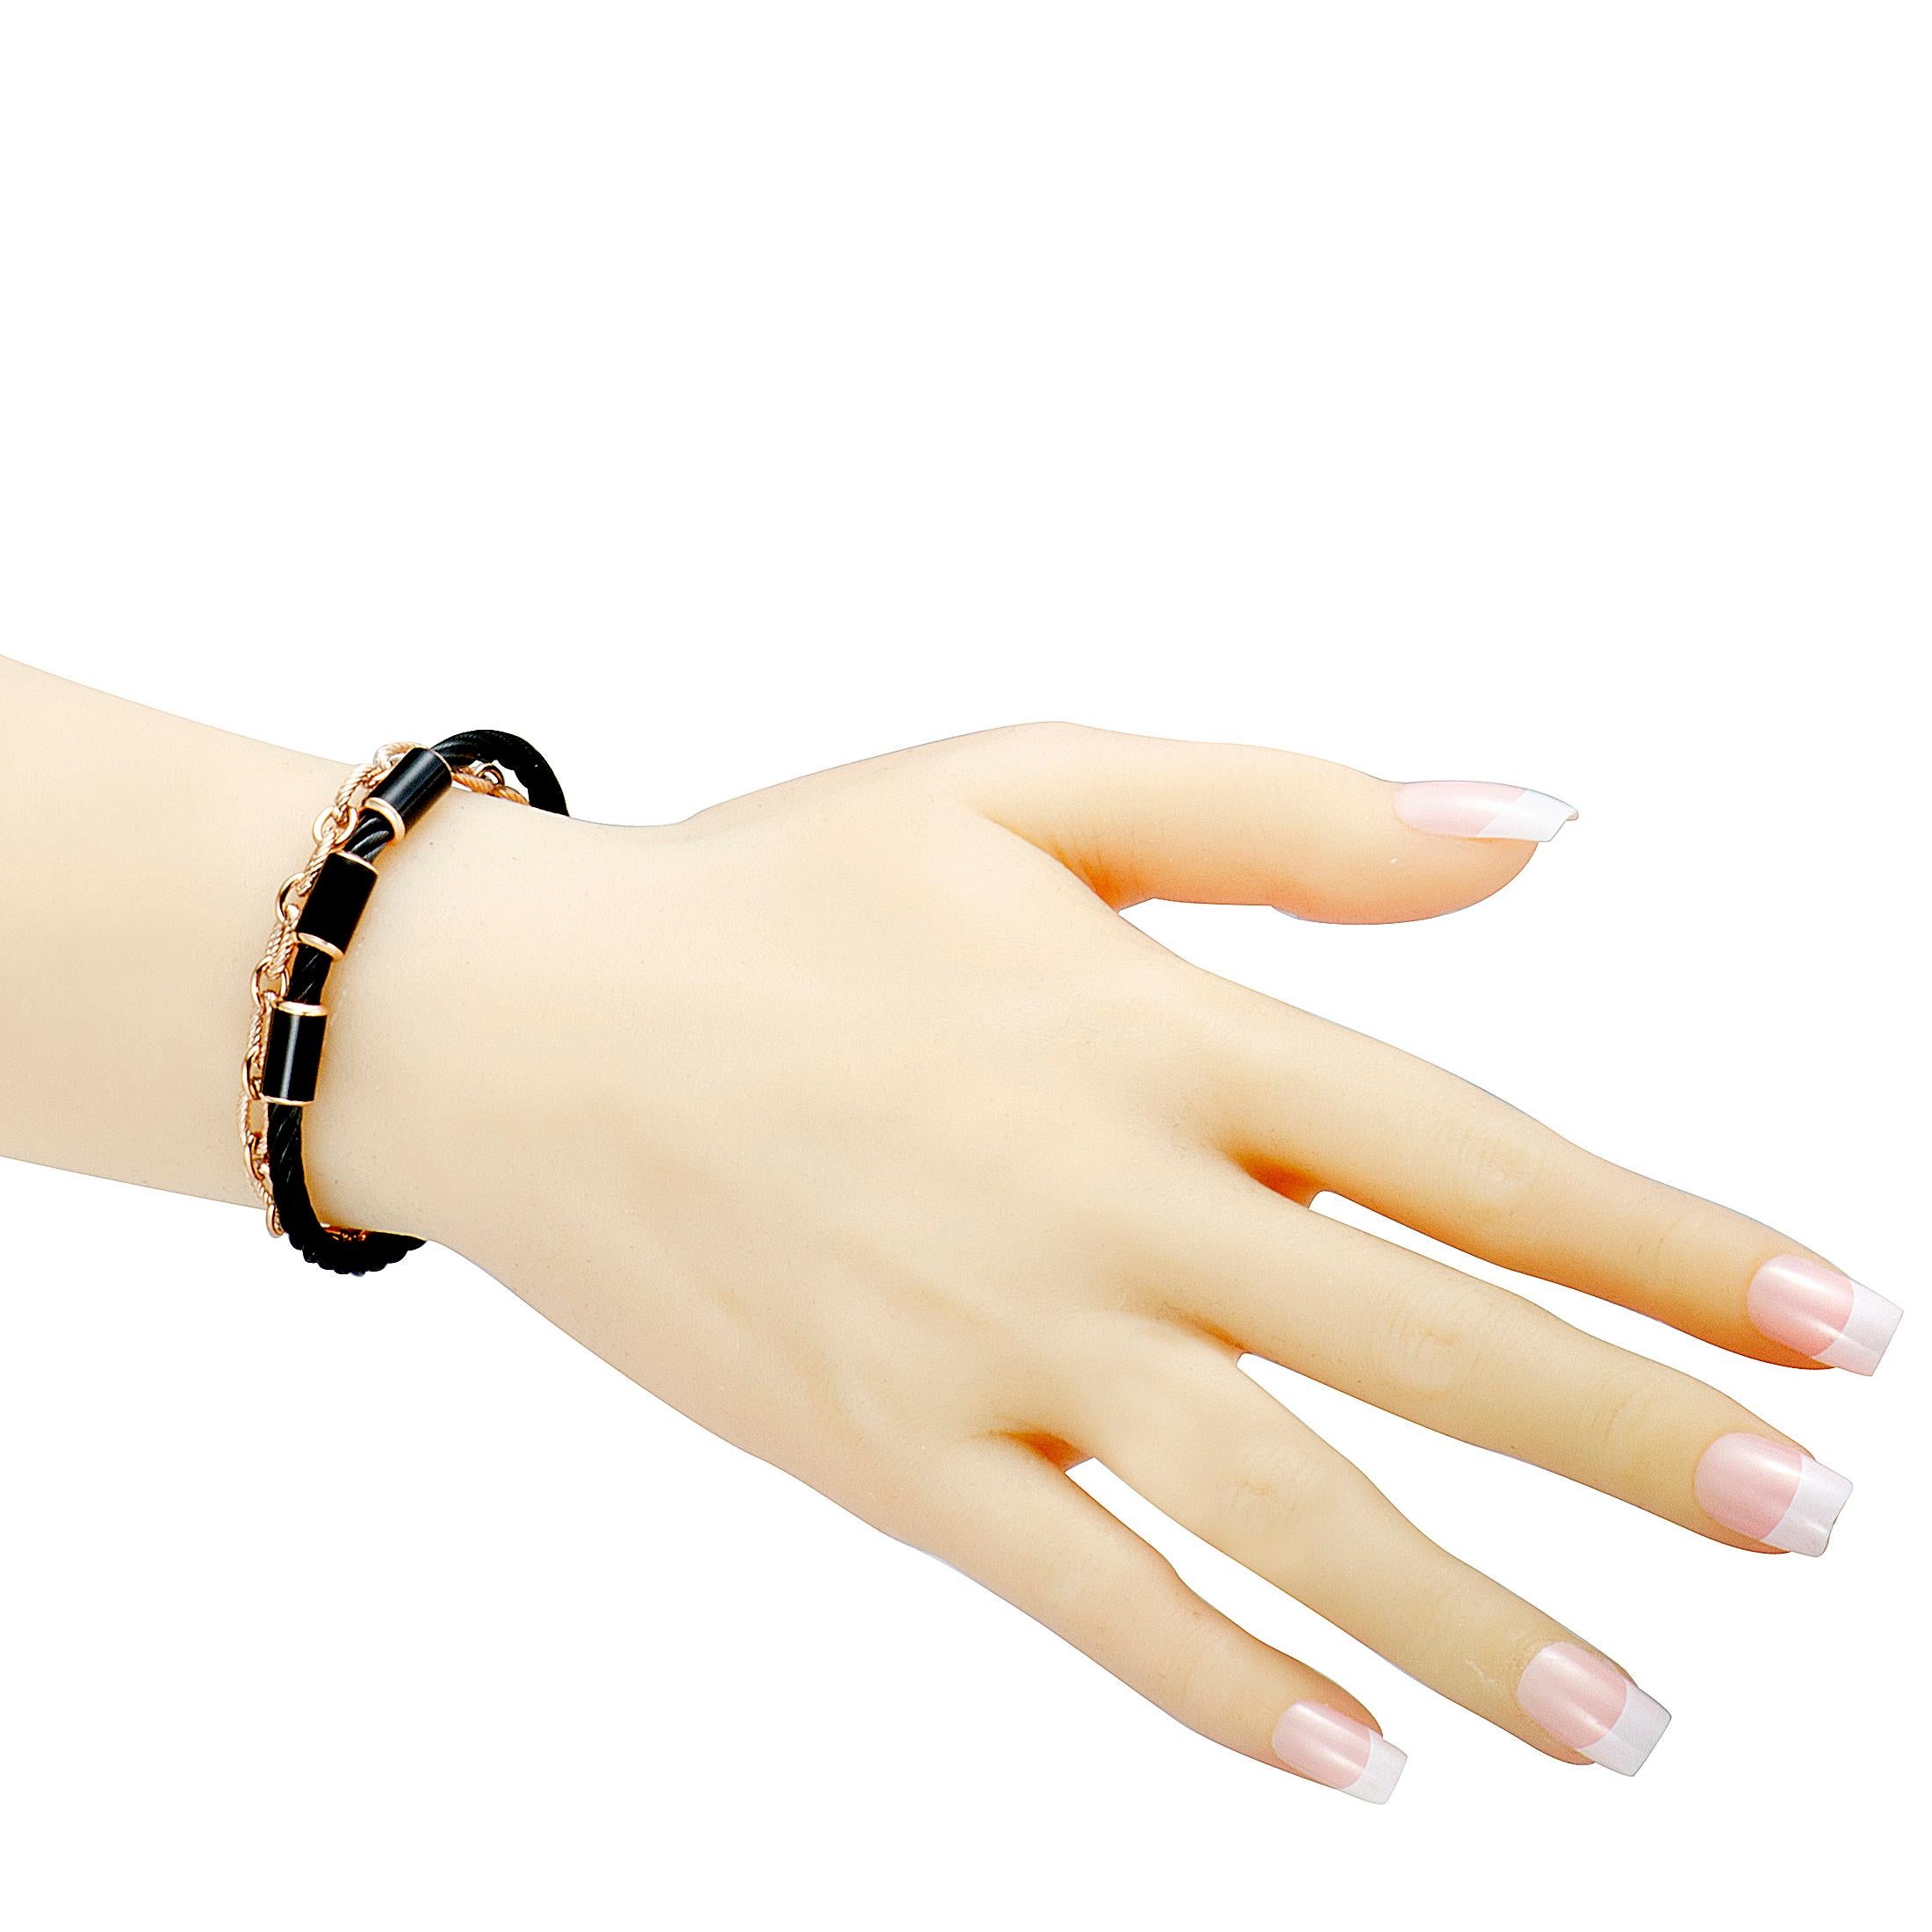 Boasting an attractive chain bracelet and a striking bangle bracelet that are beautifully made of pink and black PVD-coated stainless steel, this superb “St. Tropez” piece from Charriol offers an incredibly stylish look. The bangle bracelet is